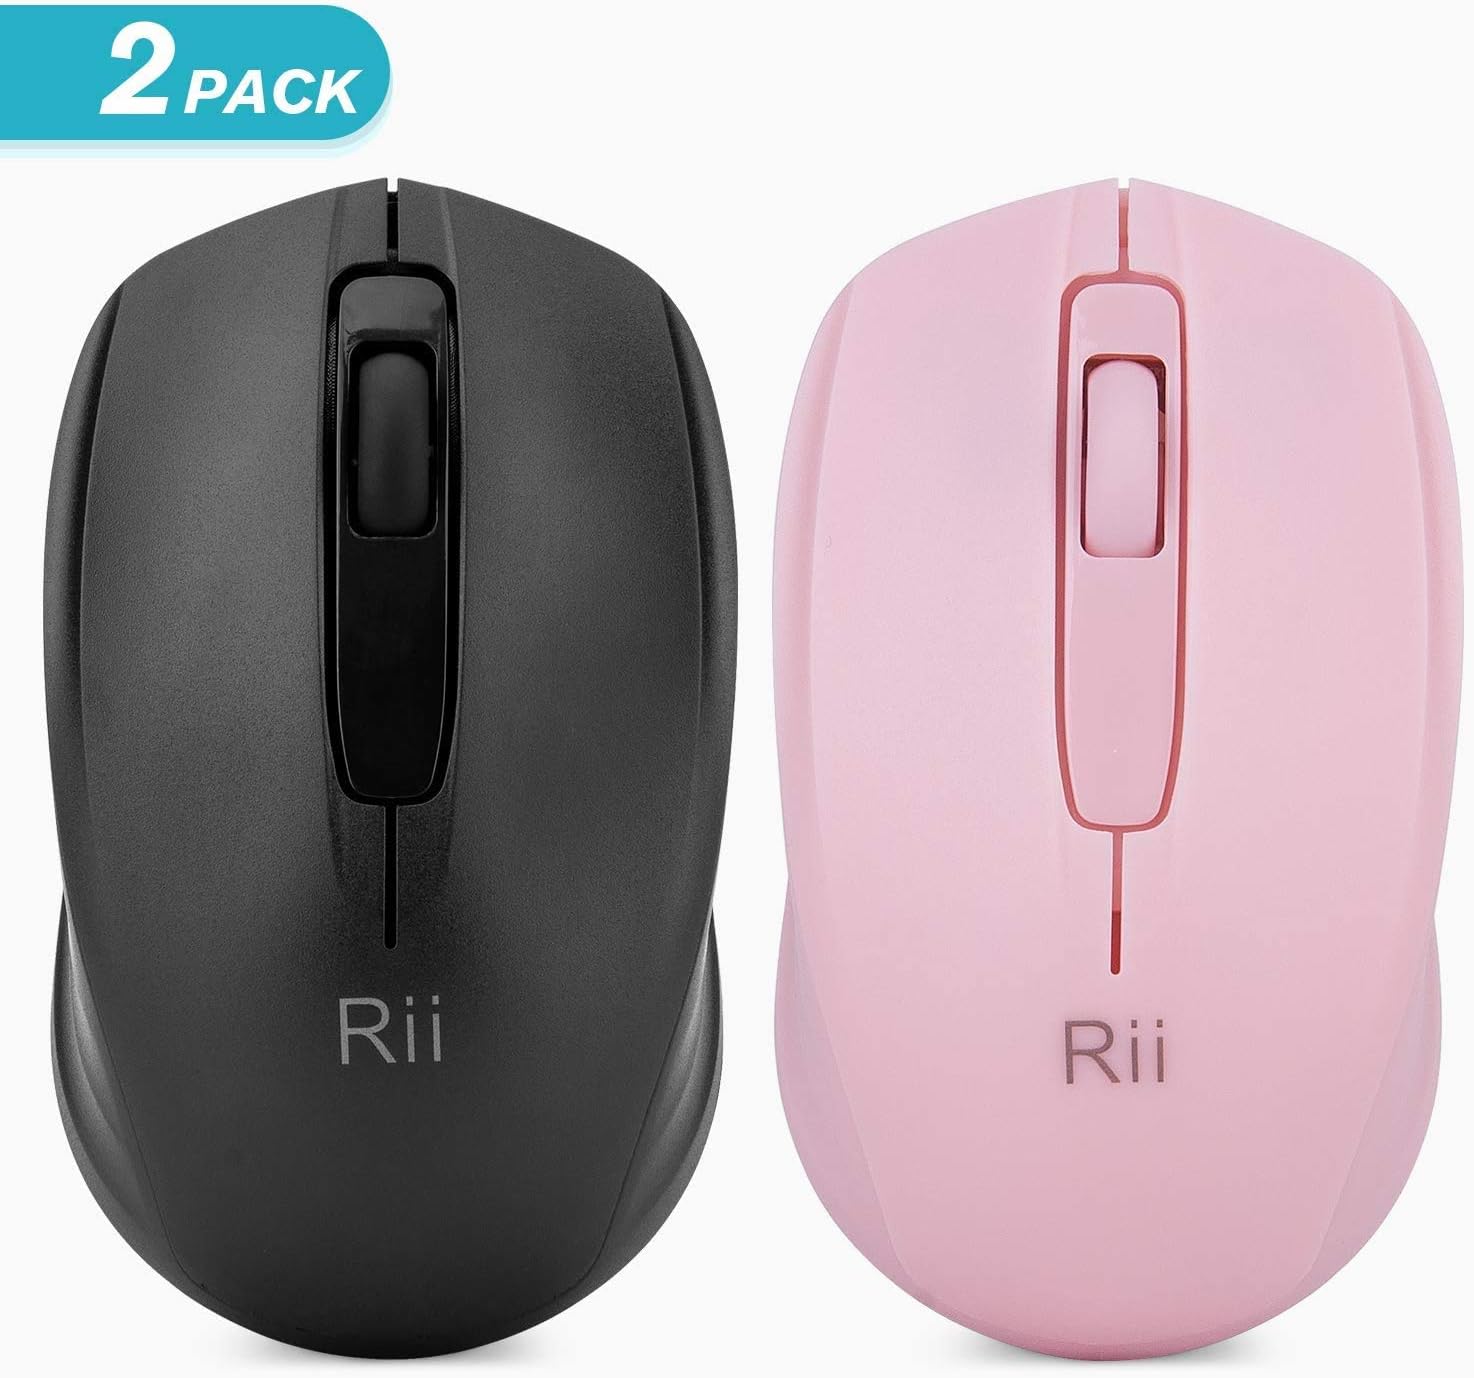 Rii Wireless Mouse with 1000DPI for PC, Laptop, Computer, and MacBook,Included Wireless USB dongle